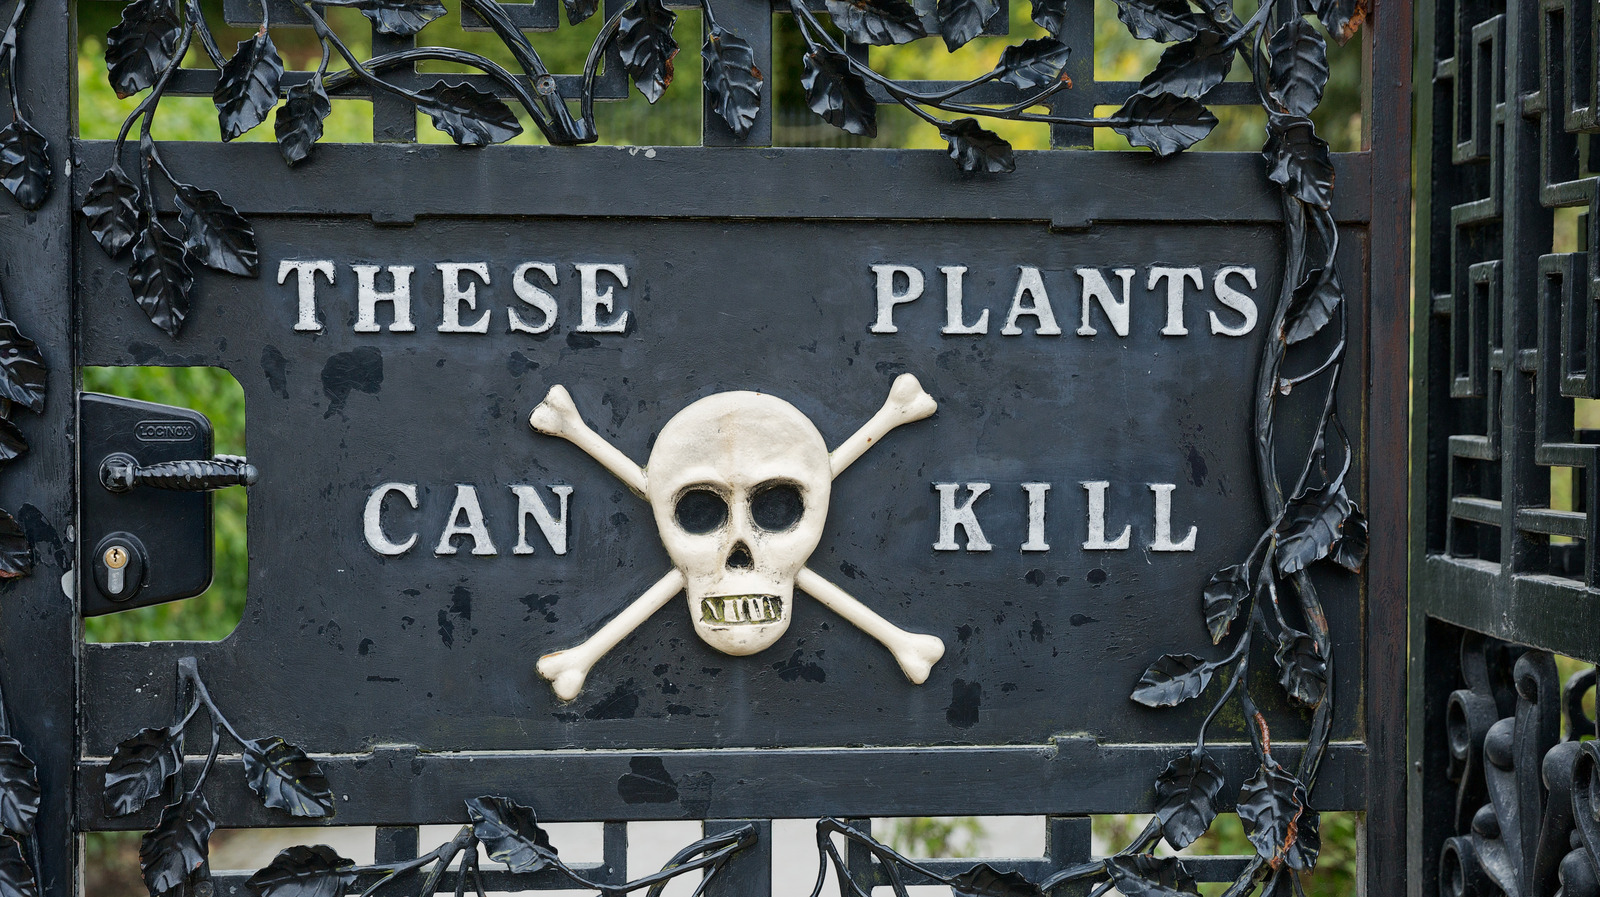 The Most Dangerous Garden In The World? Welcome To Alnwick Garden